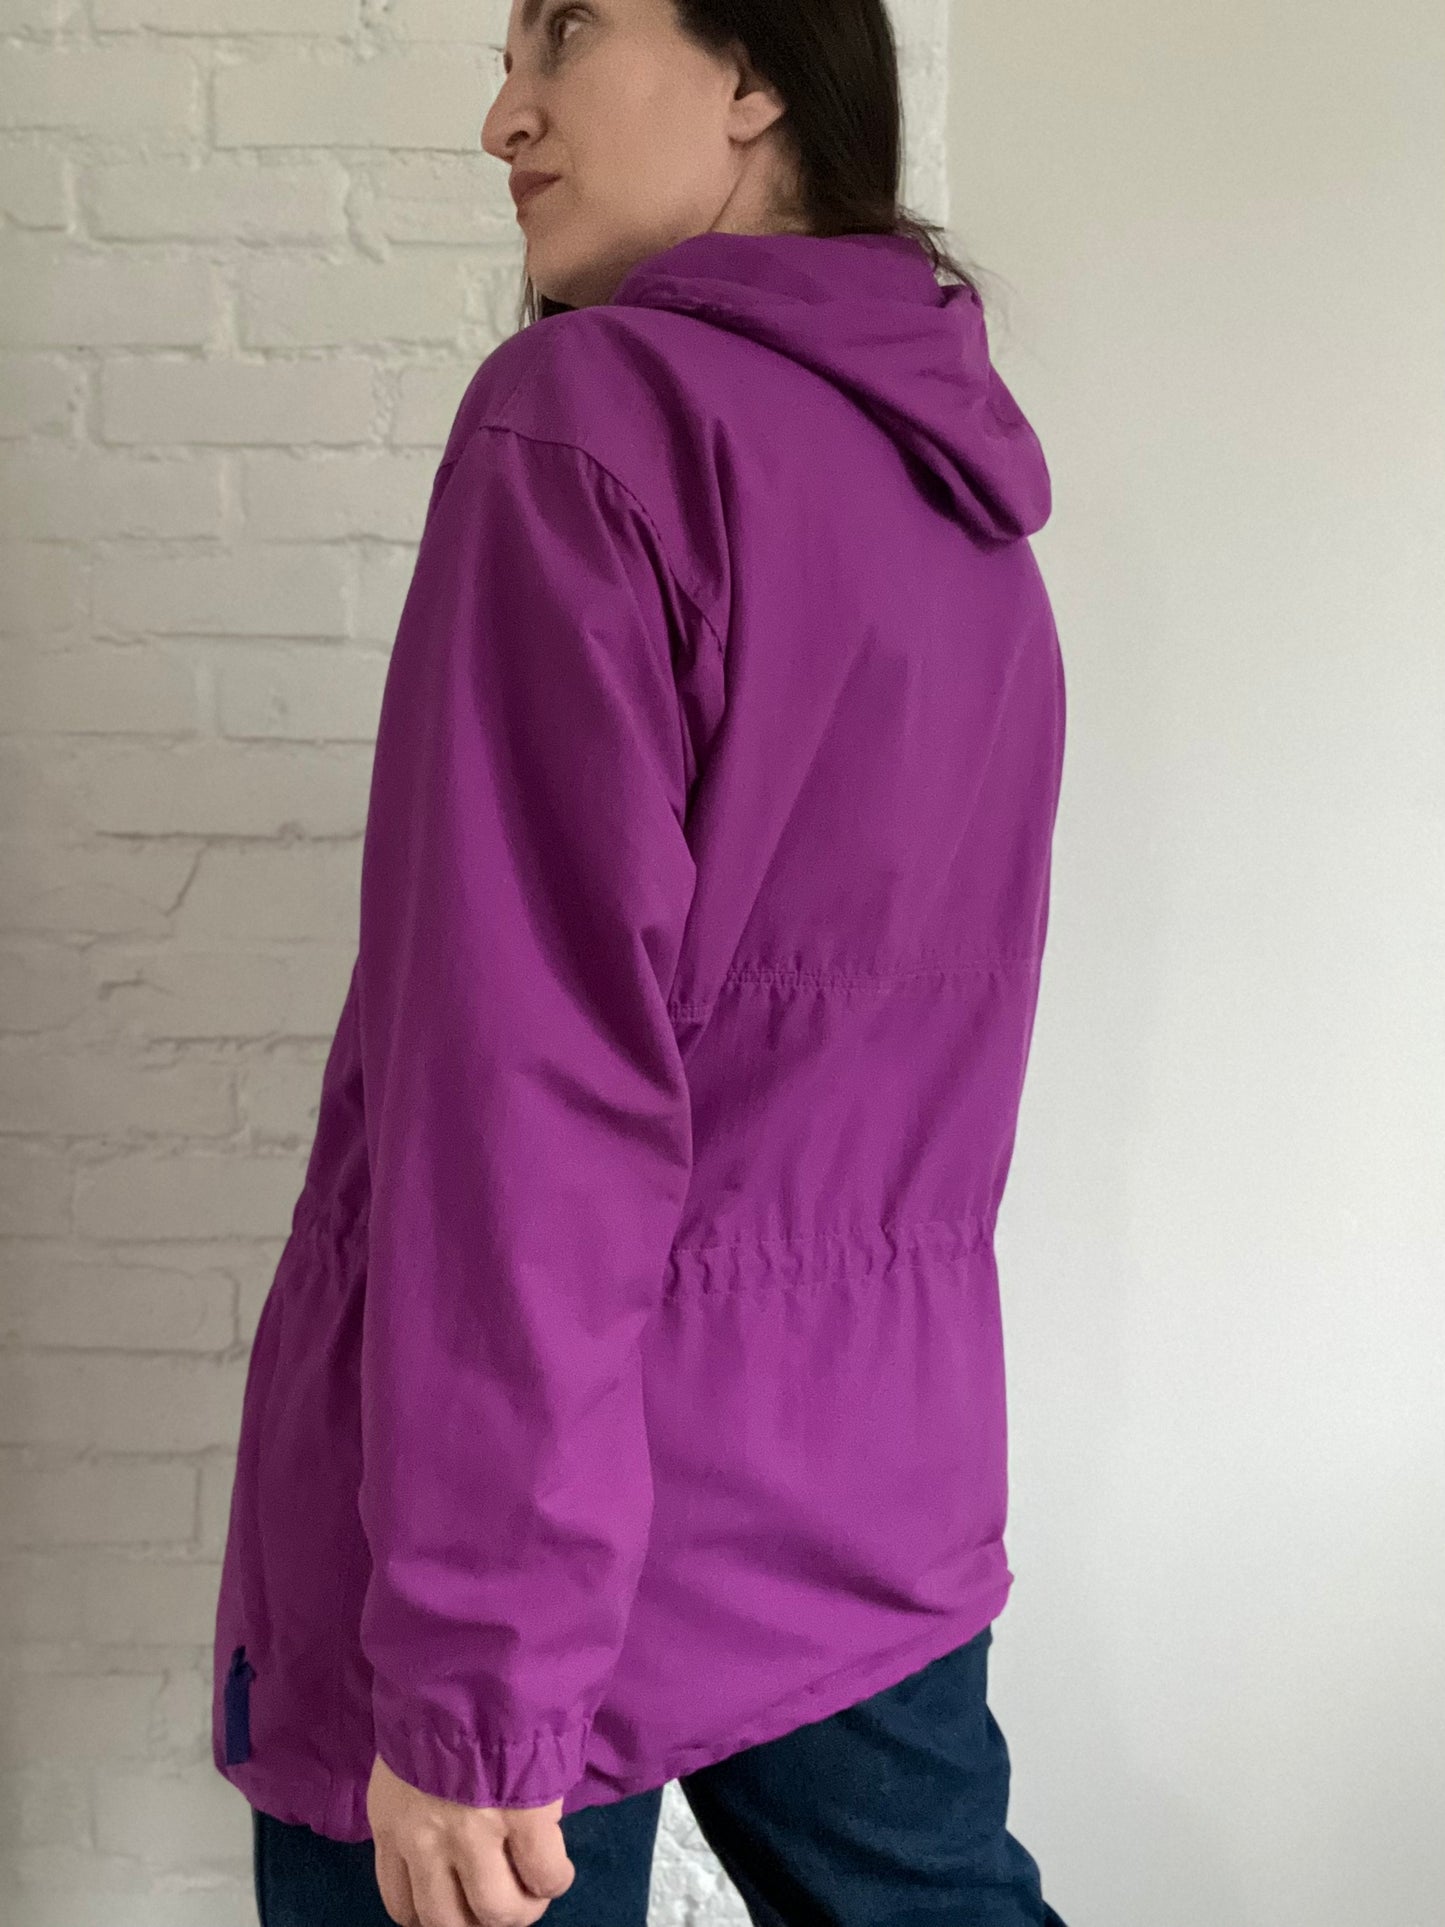 Patagonia Outdoor Shell Jacket - Size 12/L